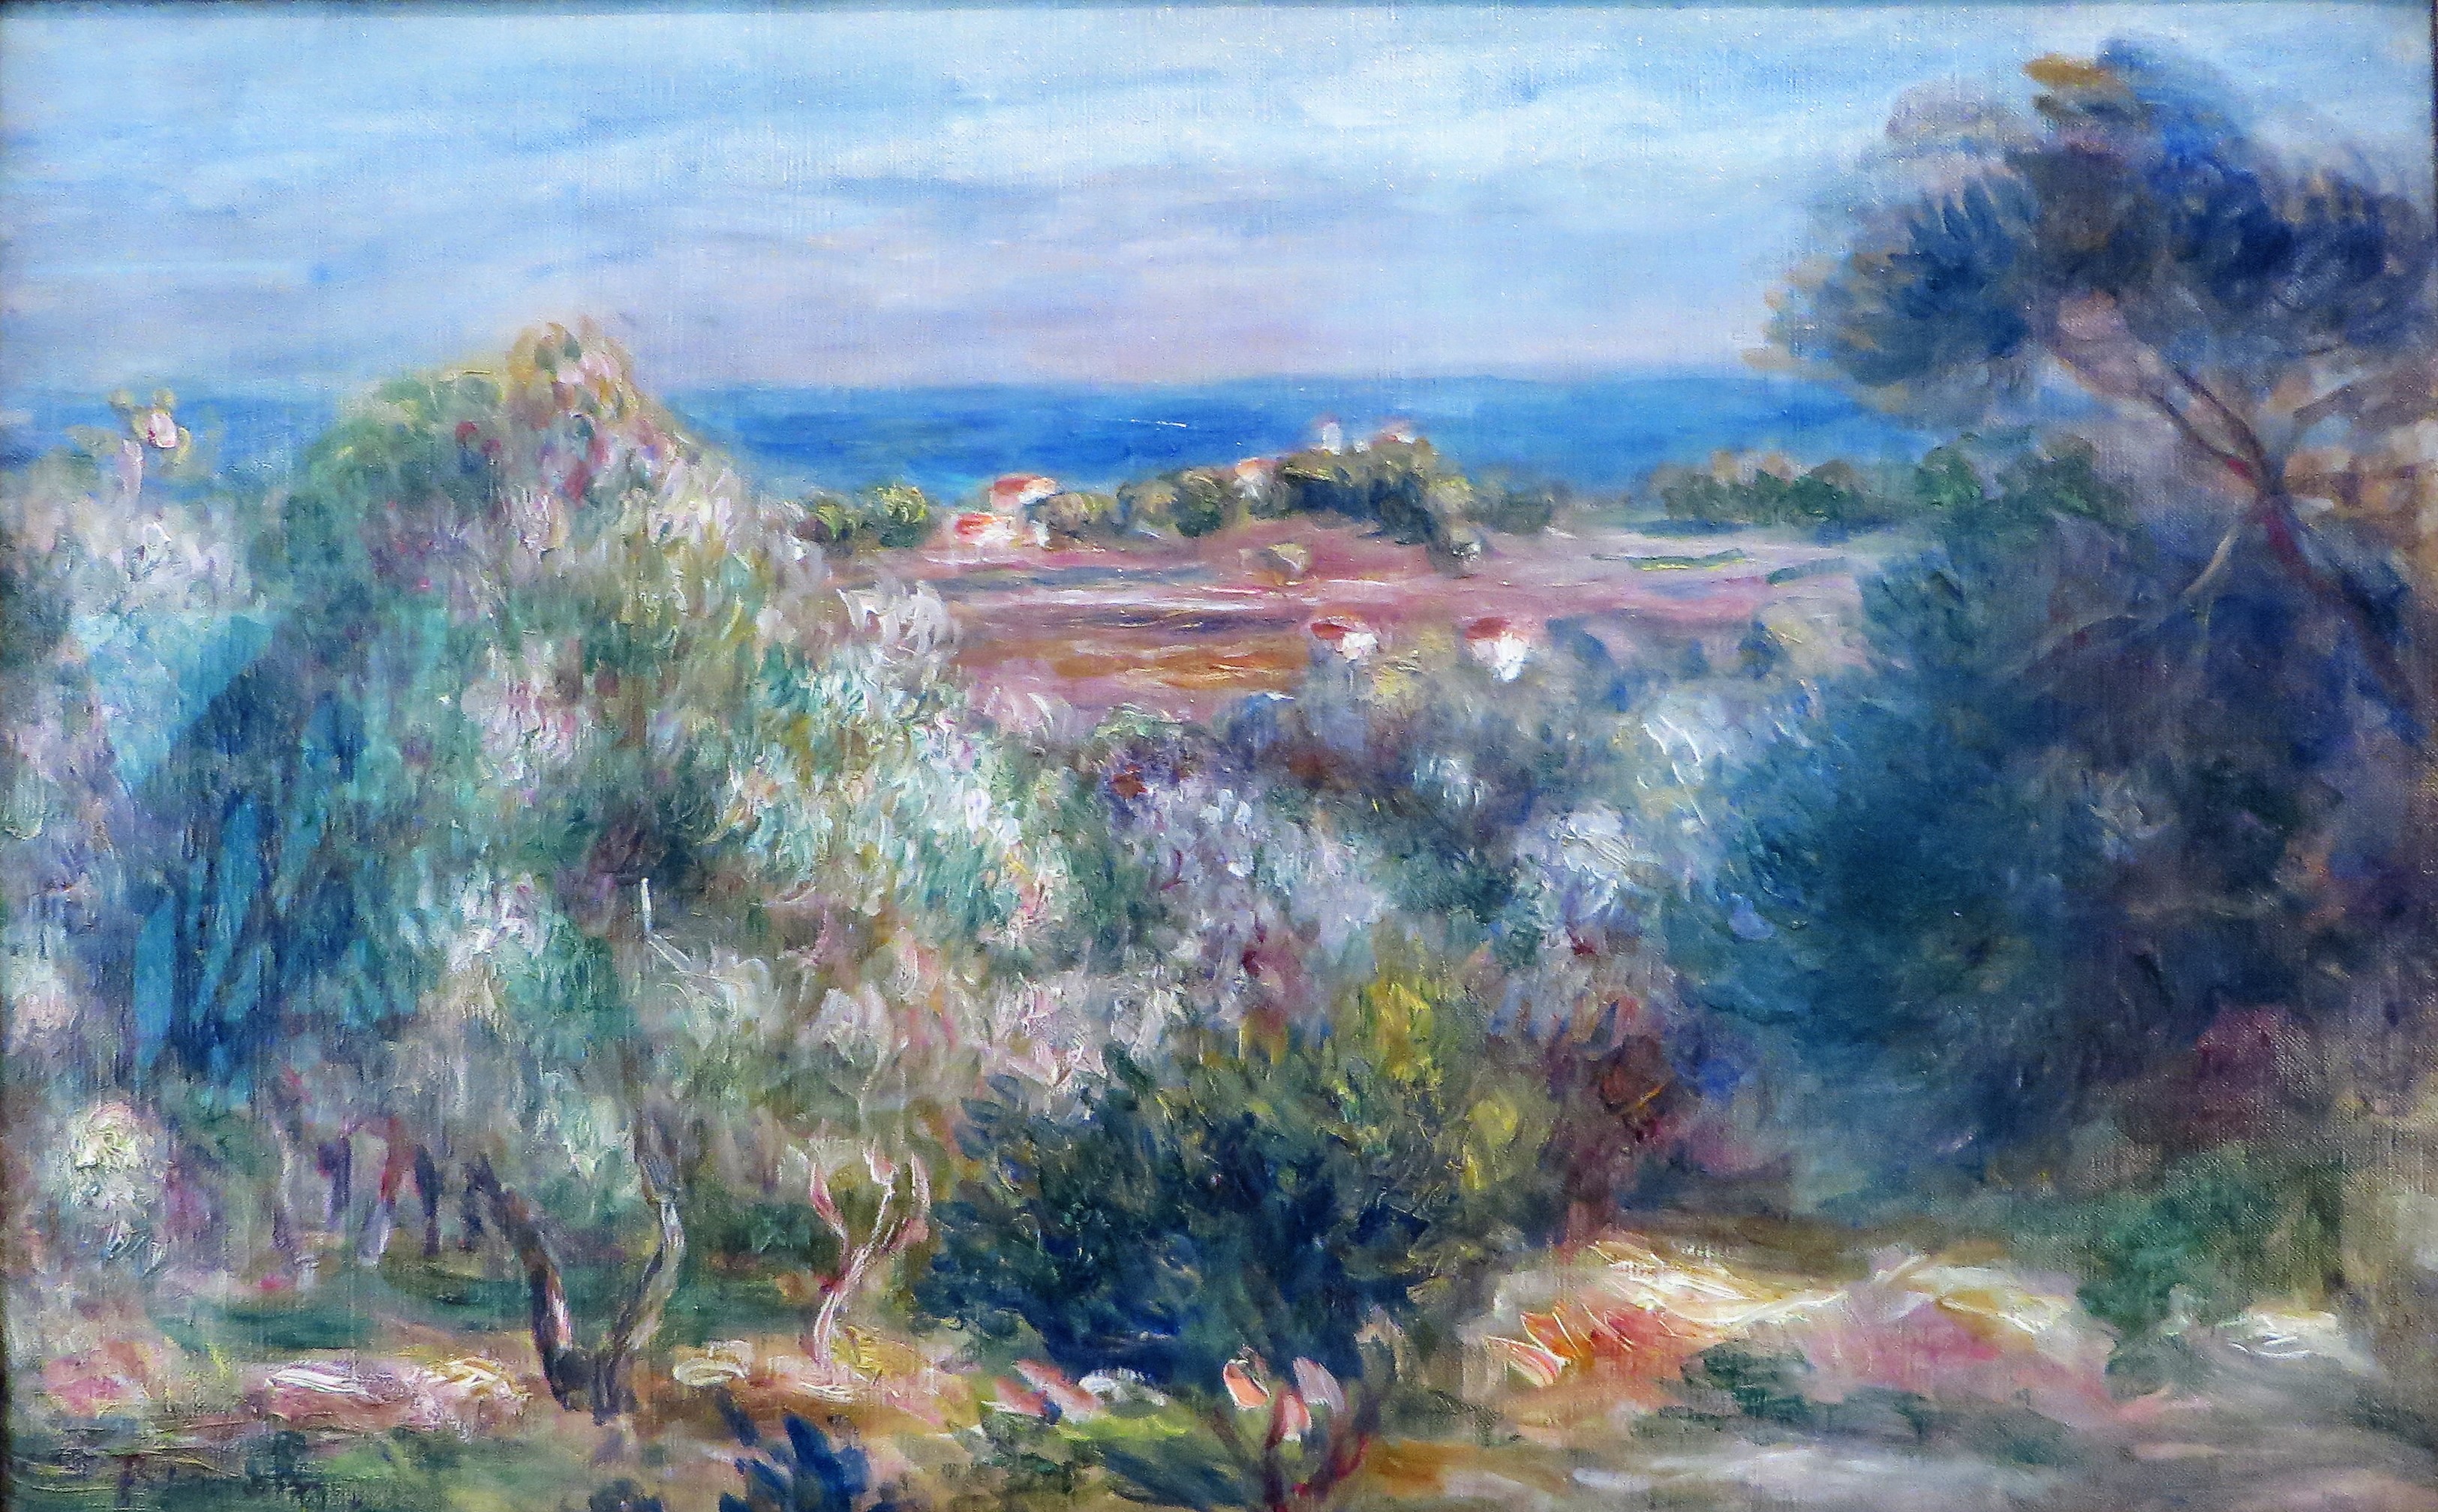 Painting by Renoir Restituted and Repurchased by German City